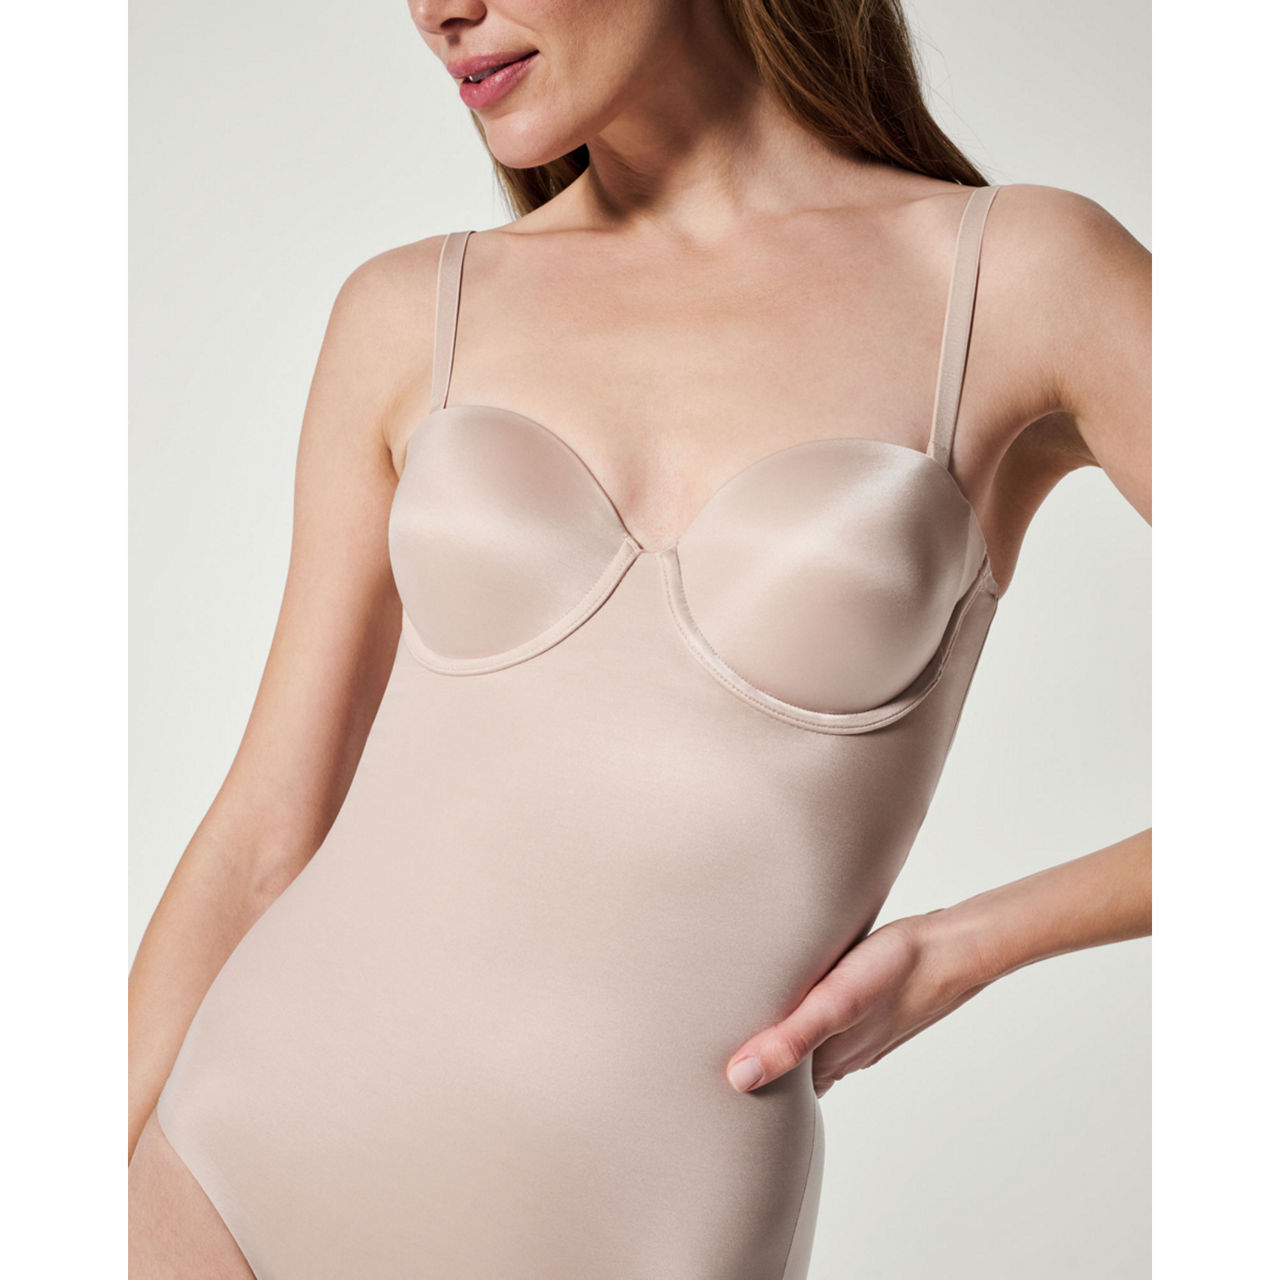 Spanx SUIT YOUR FANCY STRAPLESS CUPPED MID-TIGH BODYSUIT - Body